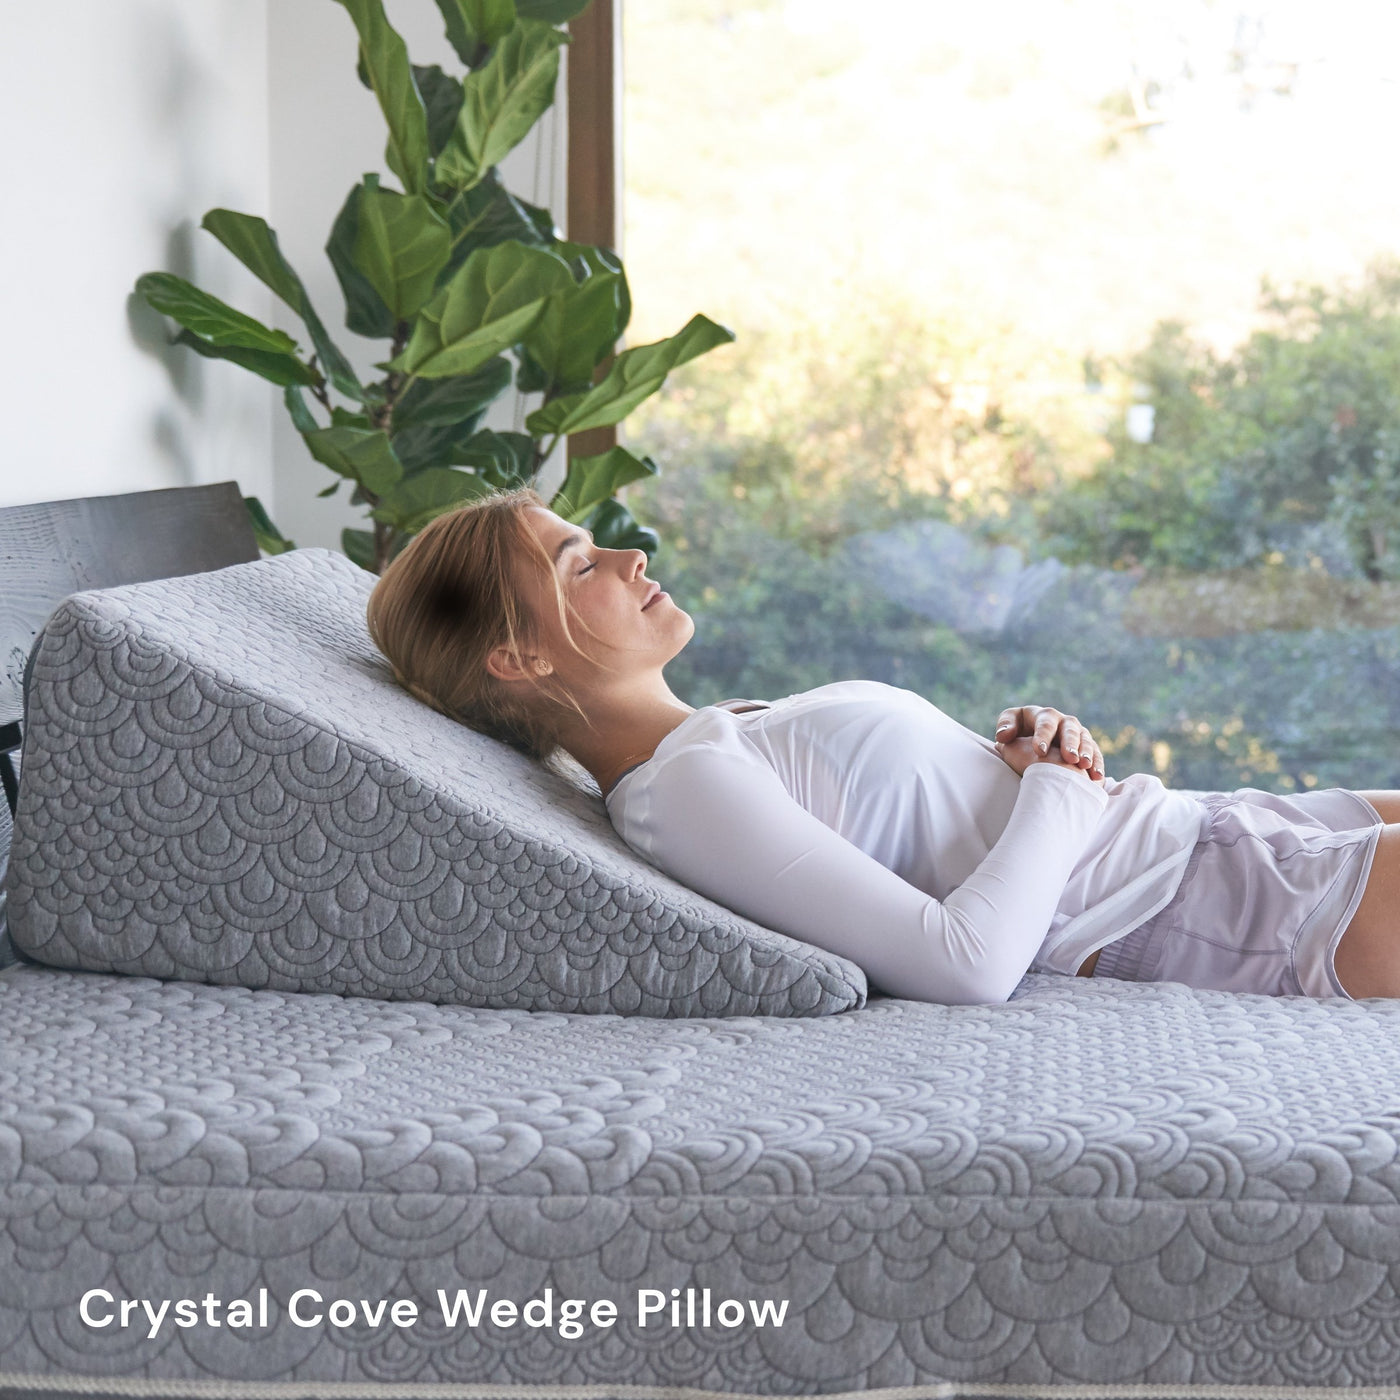 The Best Wedge Pillow  Reviews, Ratings, Comparisons